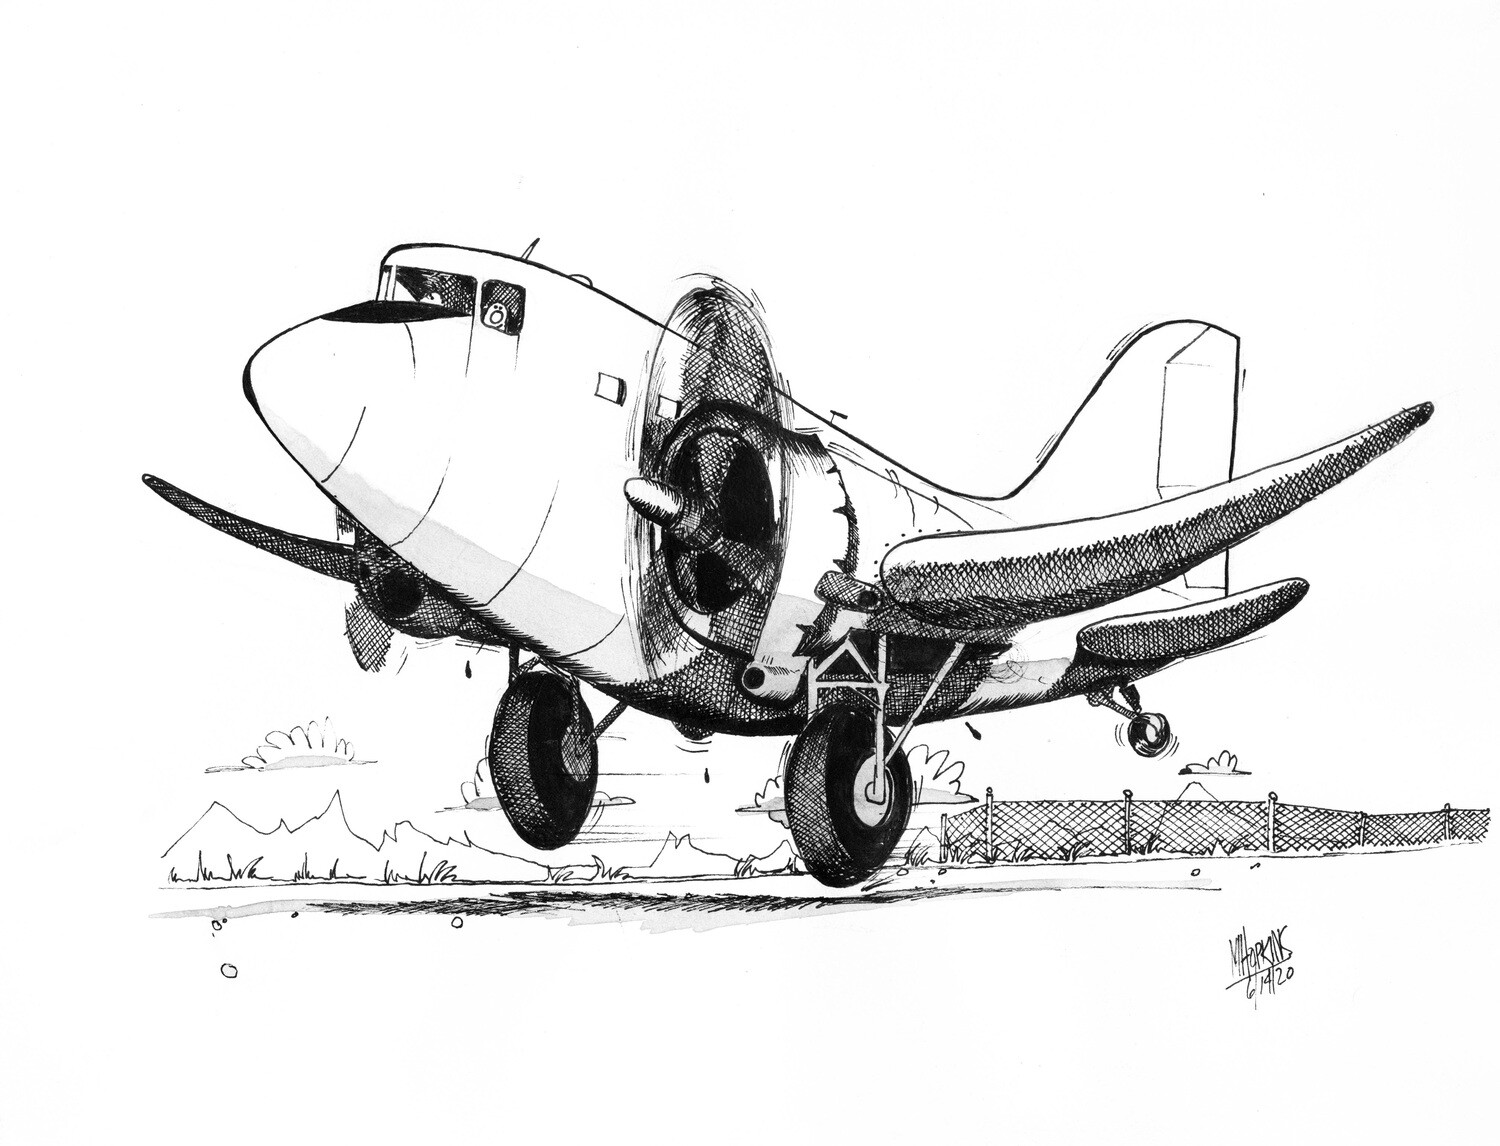 Douglas DC-3 - Limited Edition Signed Giclée Prints from $50 to $75